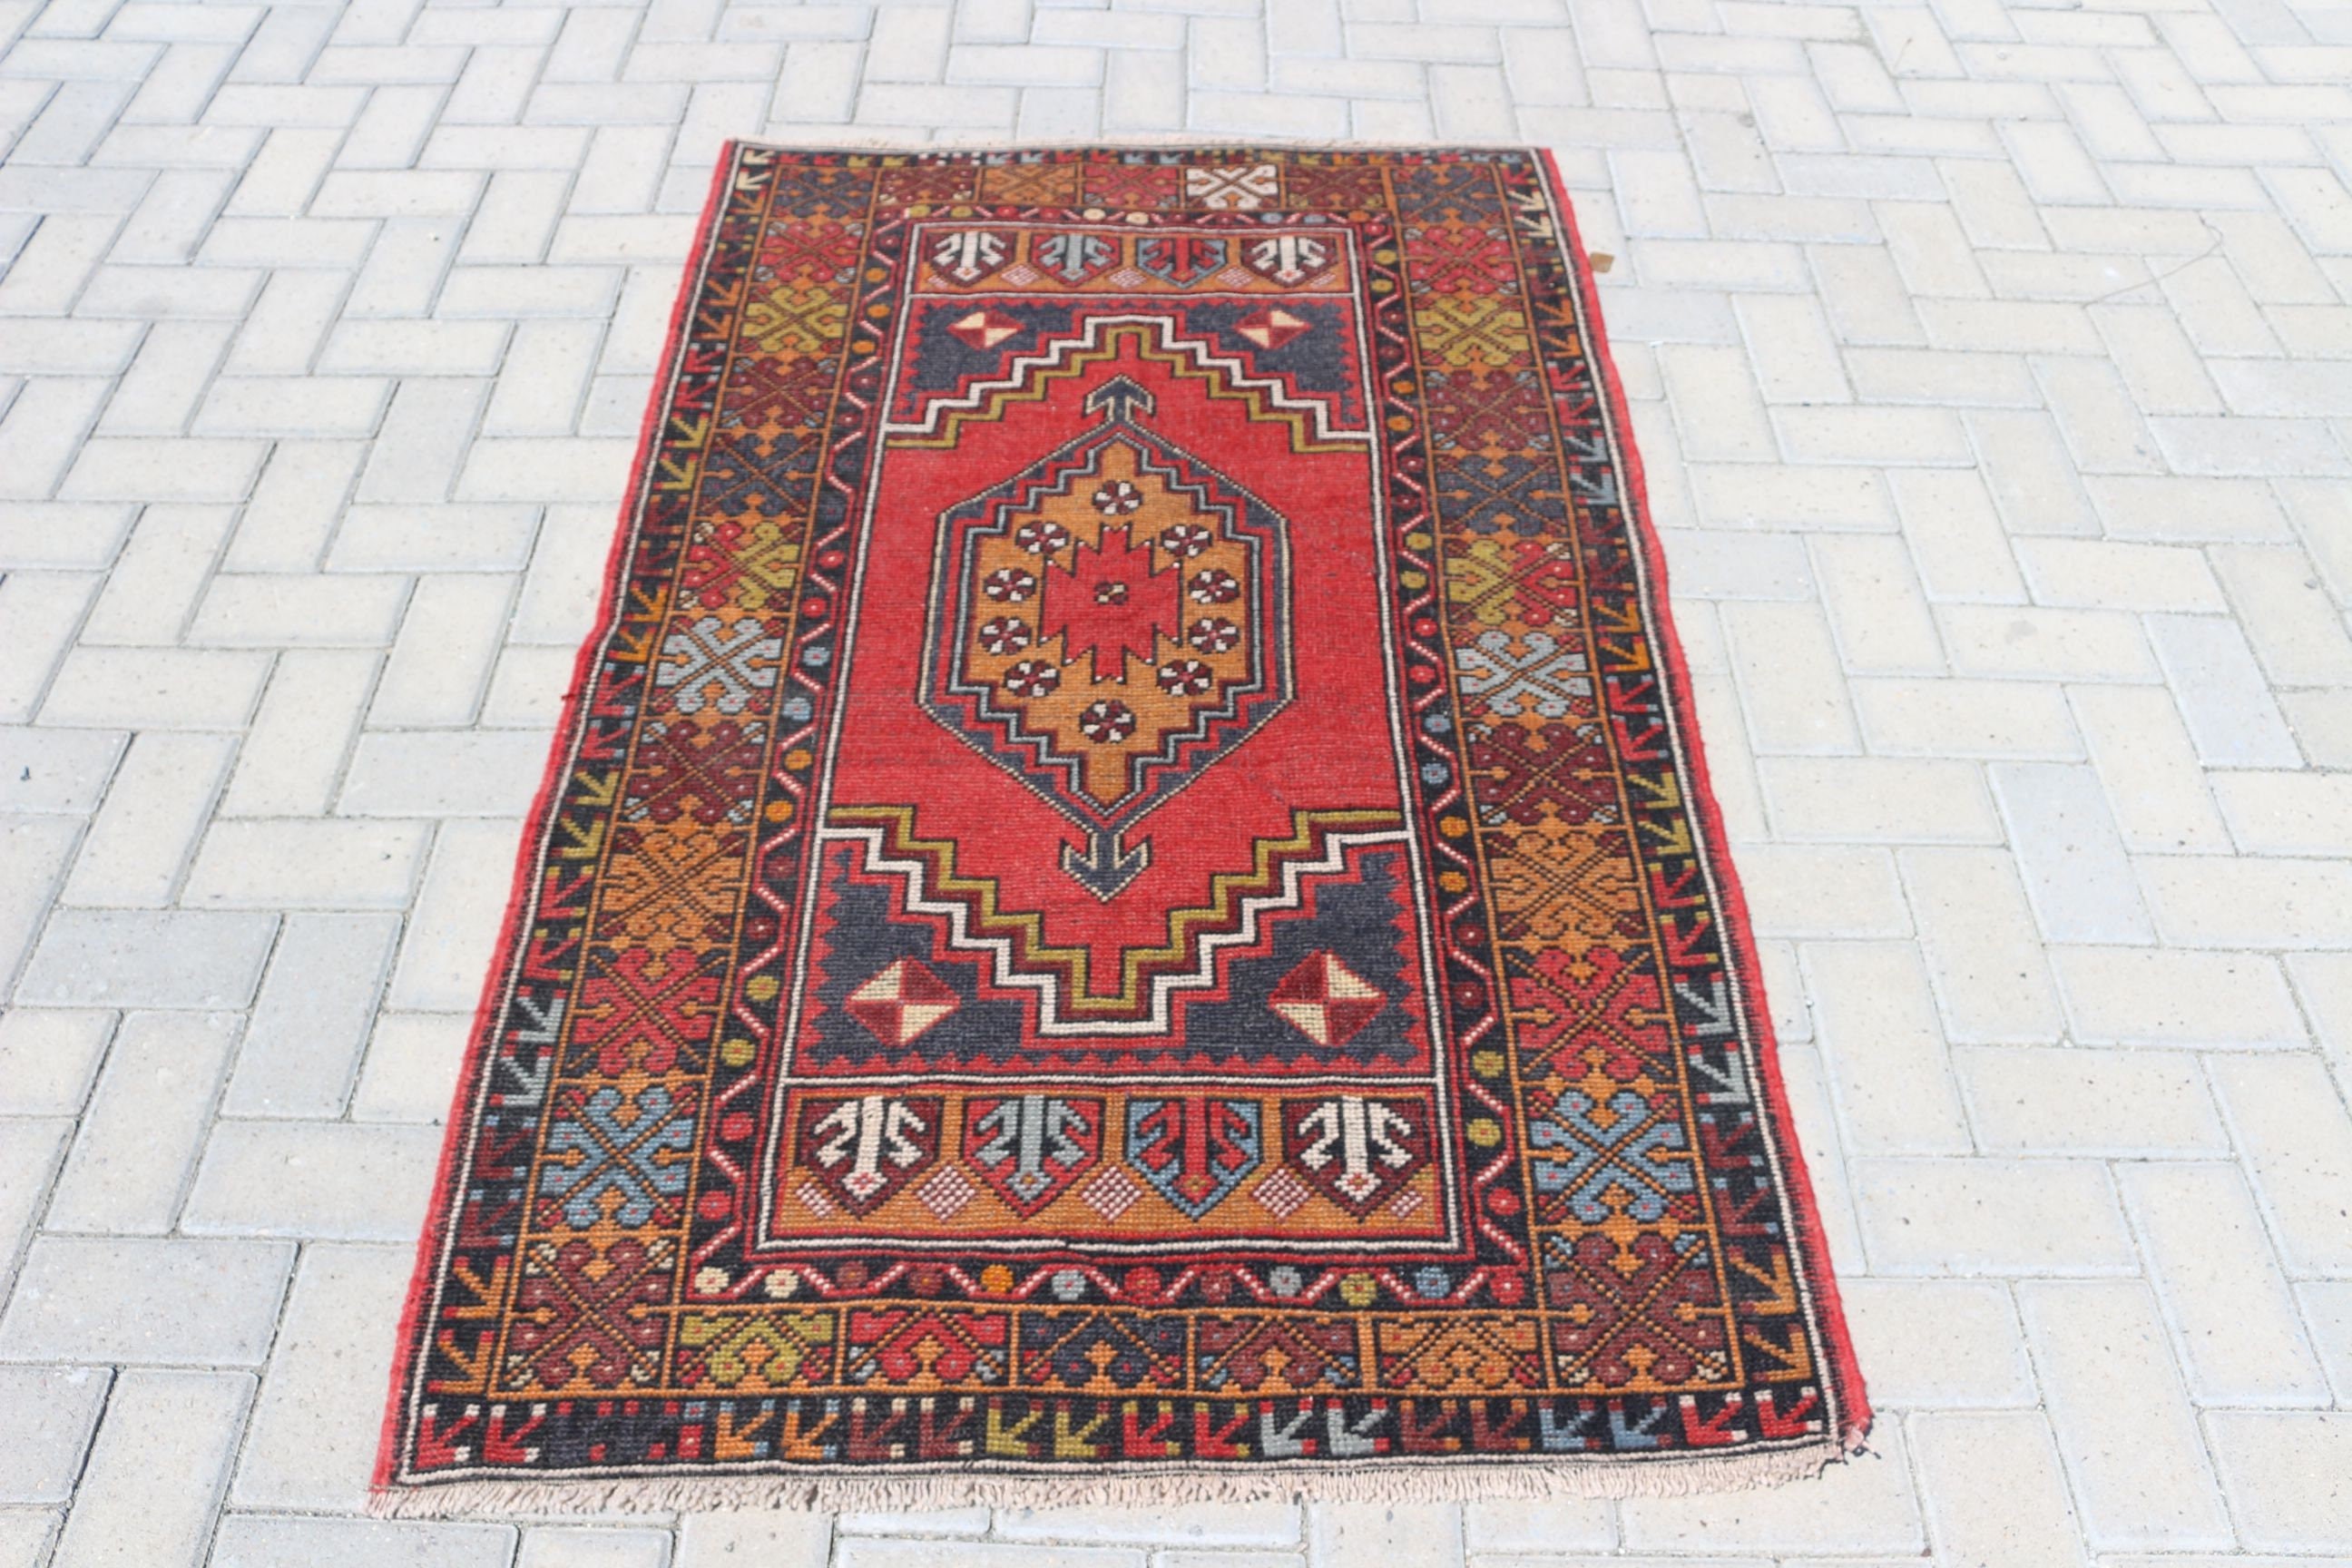 Cool Rug, 3.3x5.3 ft Accent Rugs, Red Antique Rug, Kitchen Rugs, Vintage Rugs, Rugs for Nursery, Turkish Rug, Nursery Rug